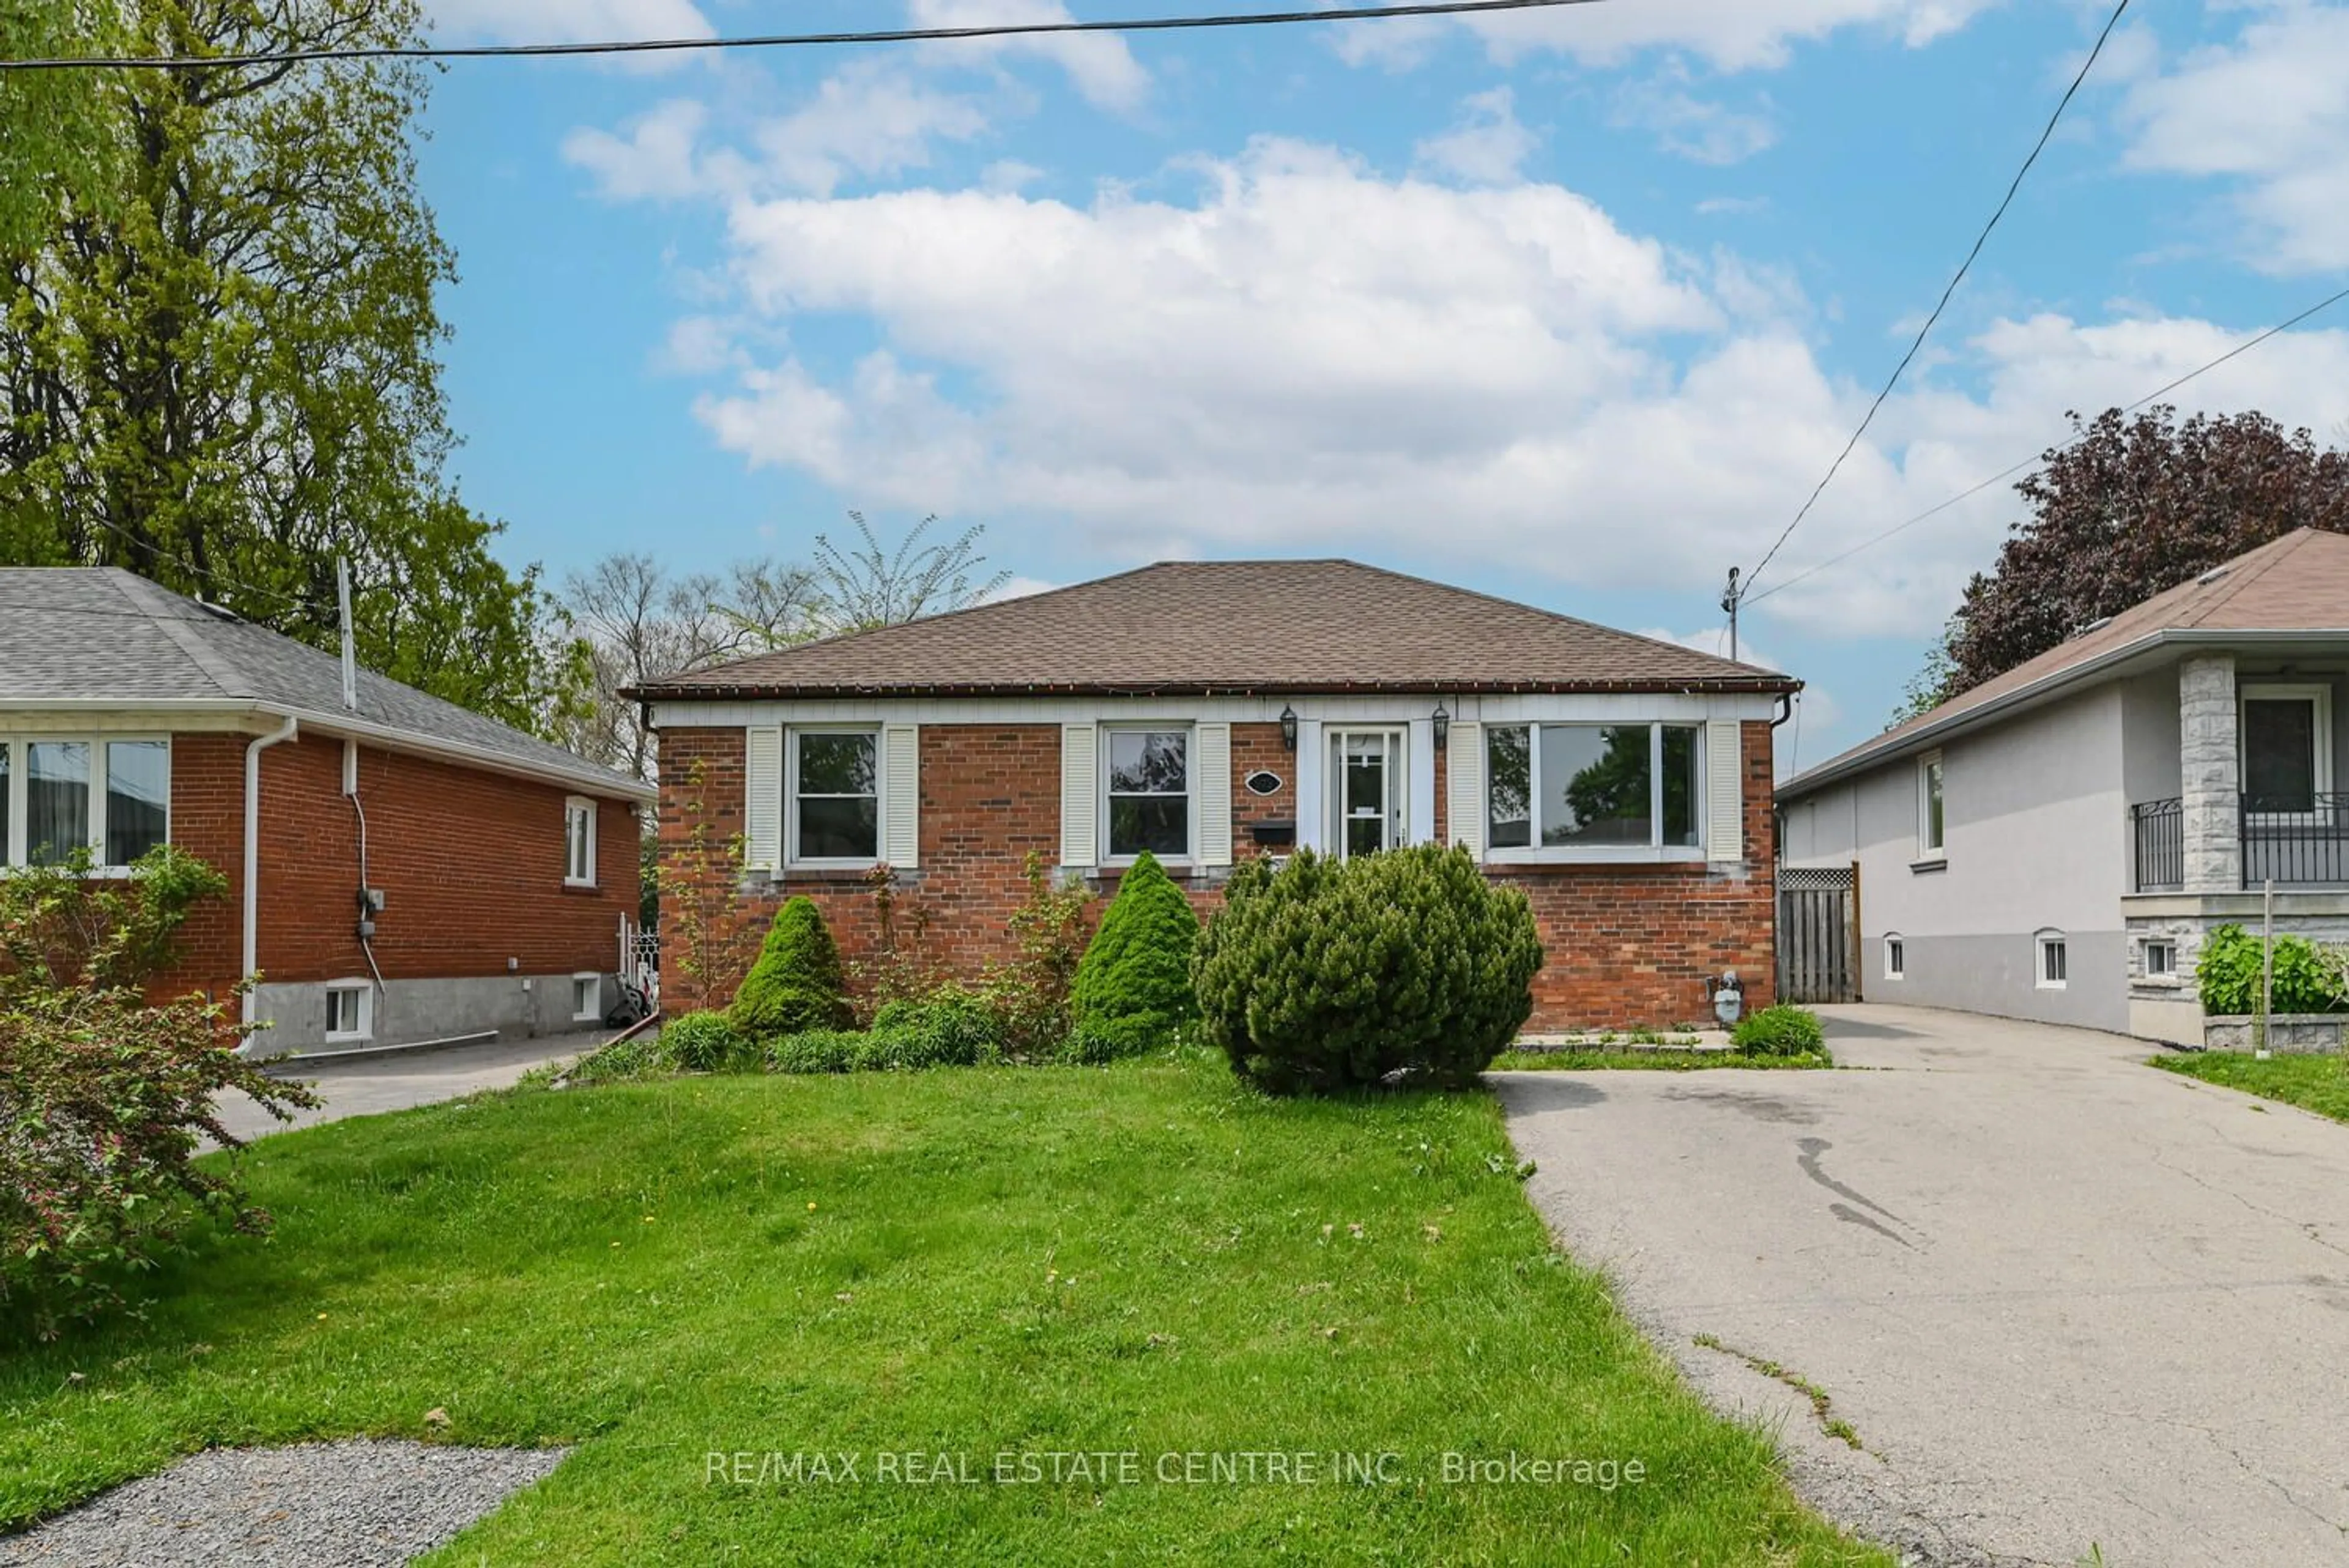 Frontside or backside of a home for 573 Exbury Cres, Mississauga Ontario L5G 2P5